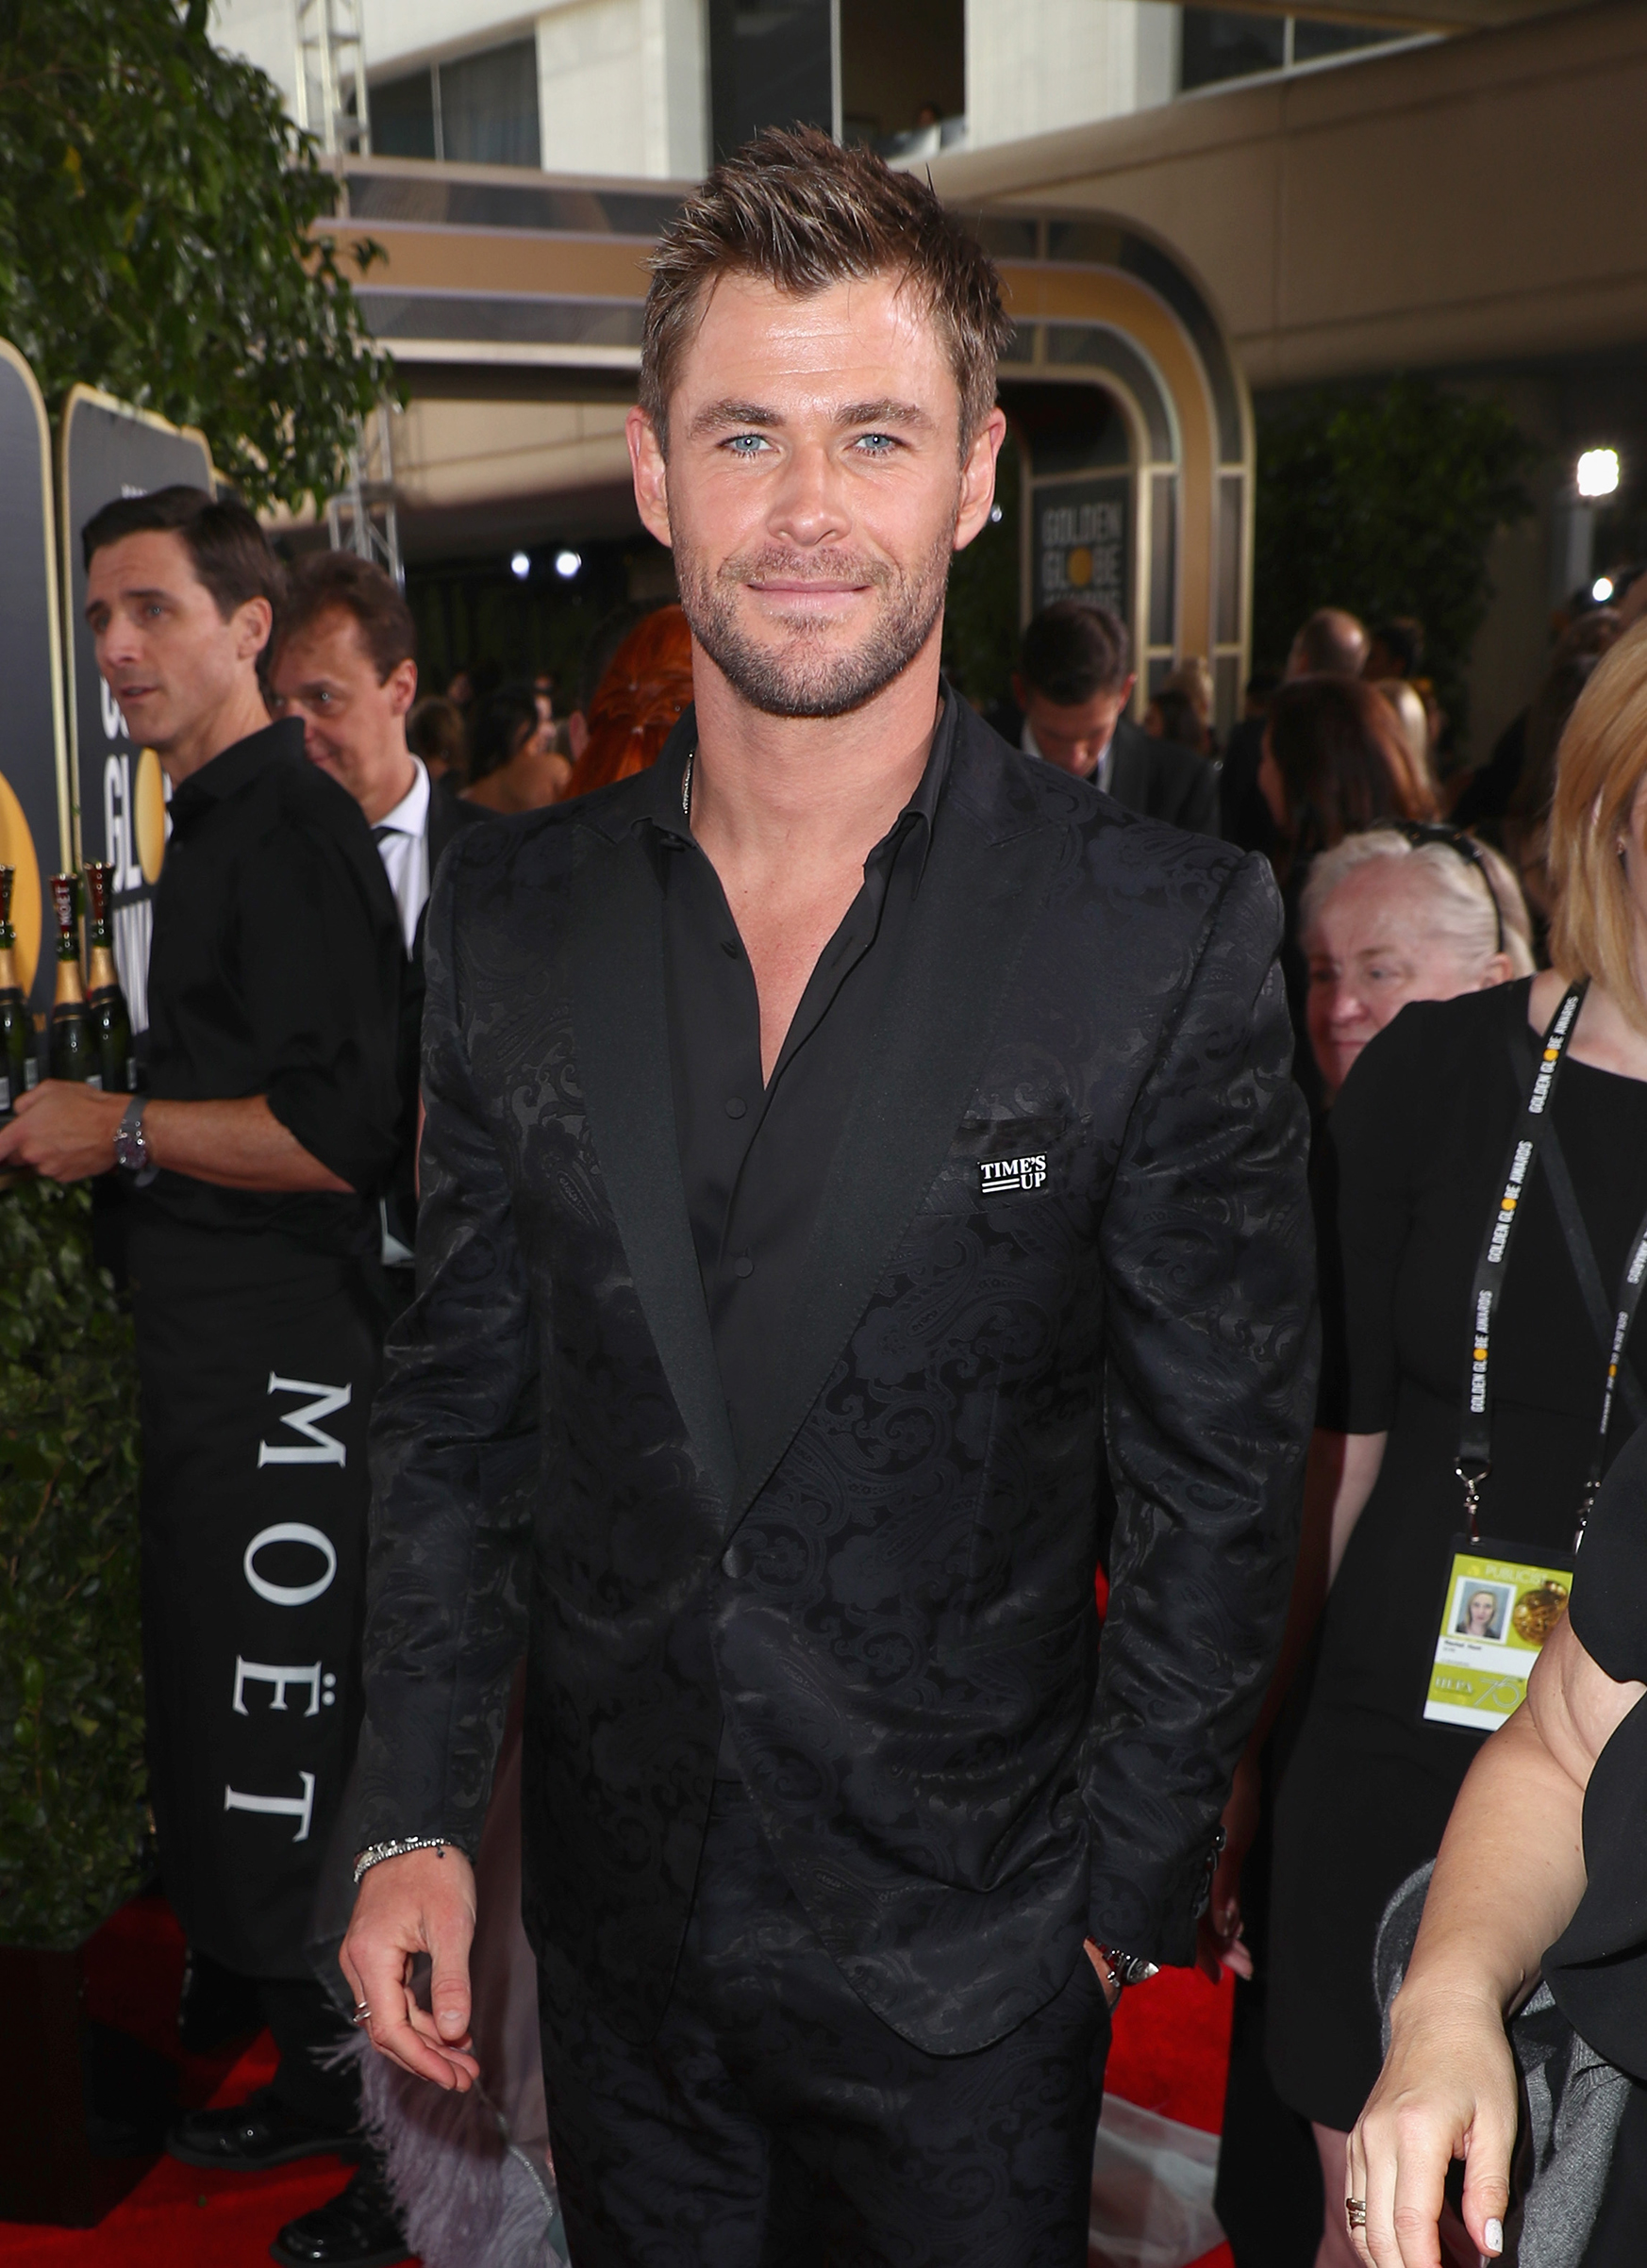 Actor Chris Hemsworth celebrates The 75th Annual Golden Globe Awards with Moet & Chandon at The Beverly Hilton Hotel on January 7, 2018 in Beverly Hills, California. (Joe Scarnici—Getty Images)